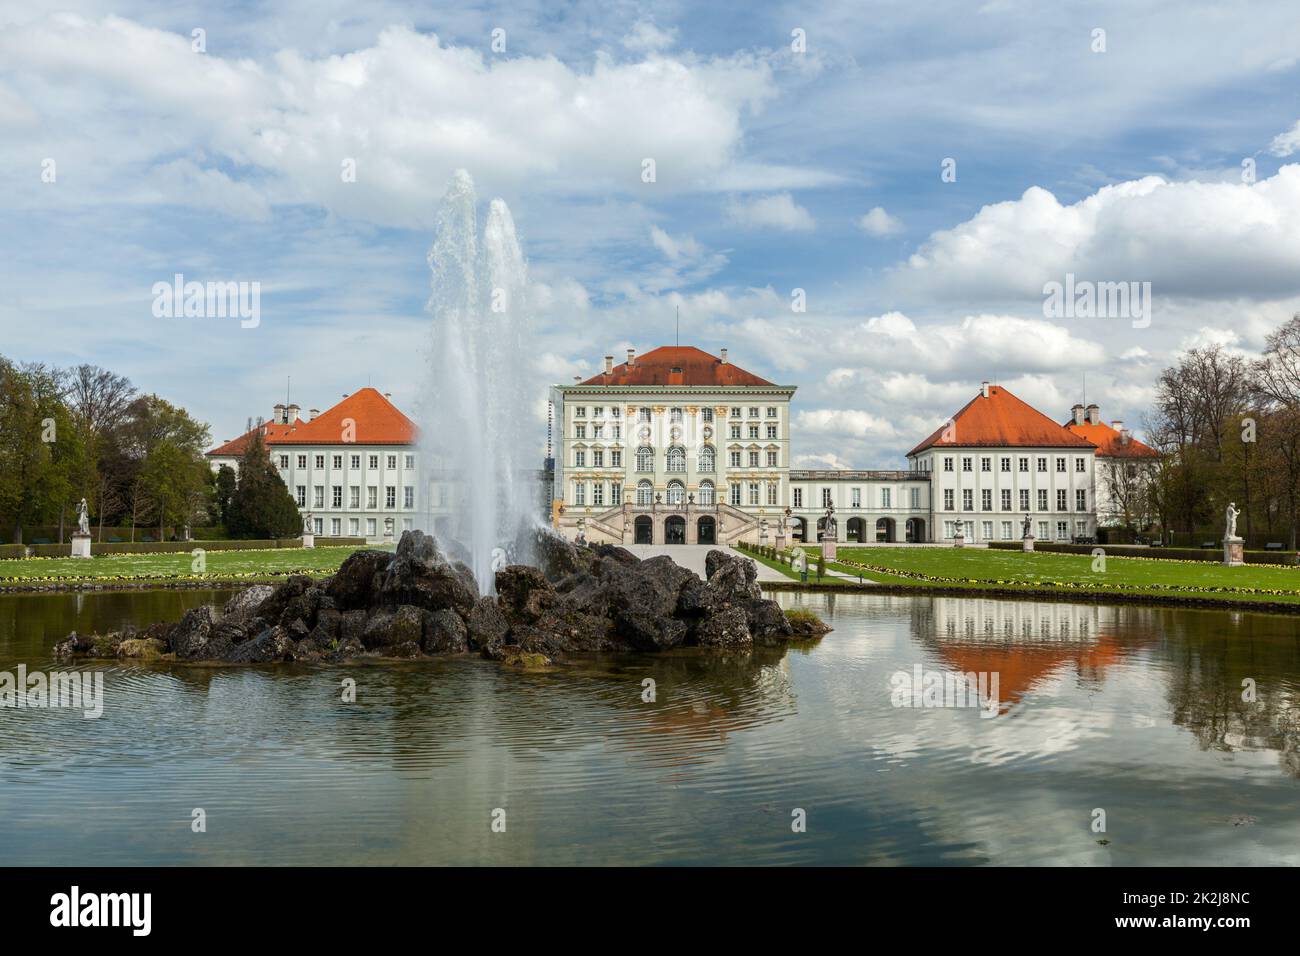 Nymphenburg Palace with fountain. Munich, Germany Stock Photo